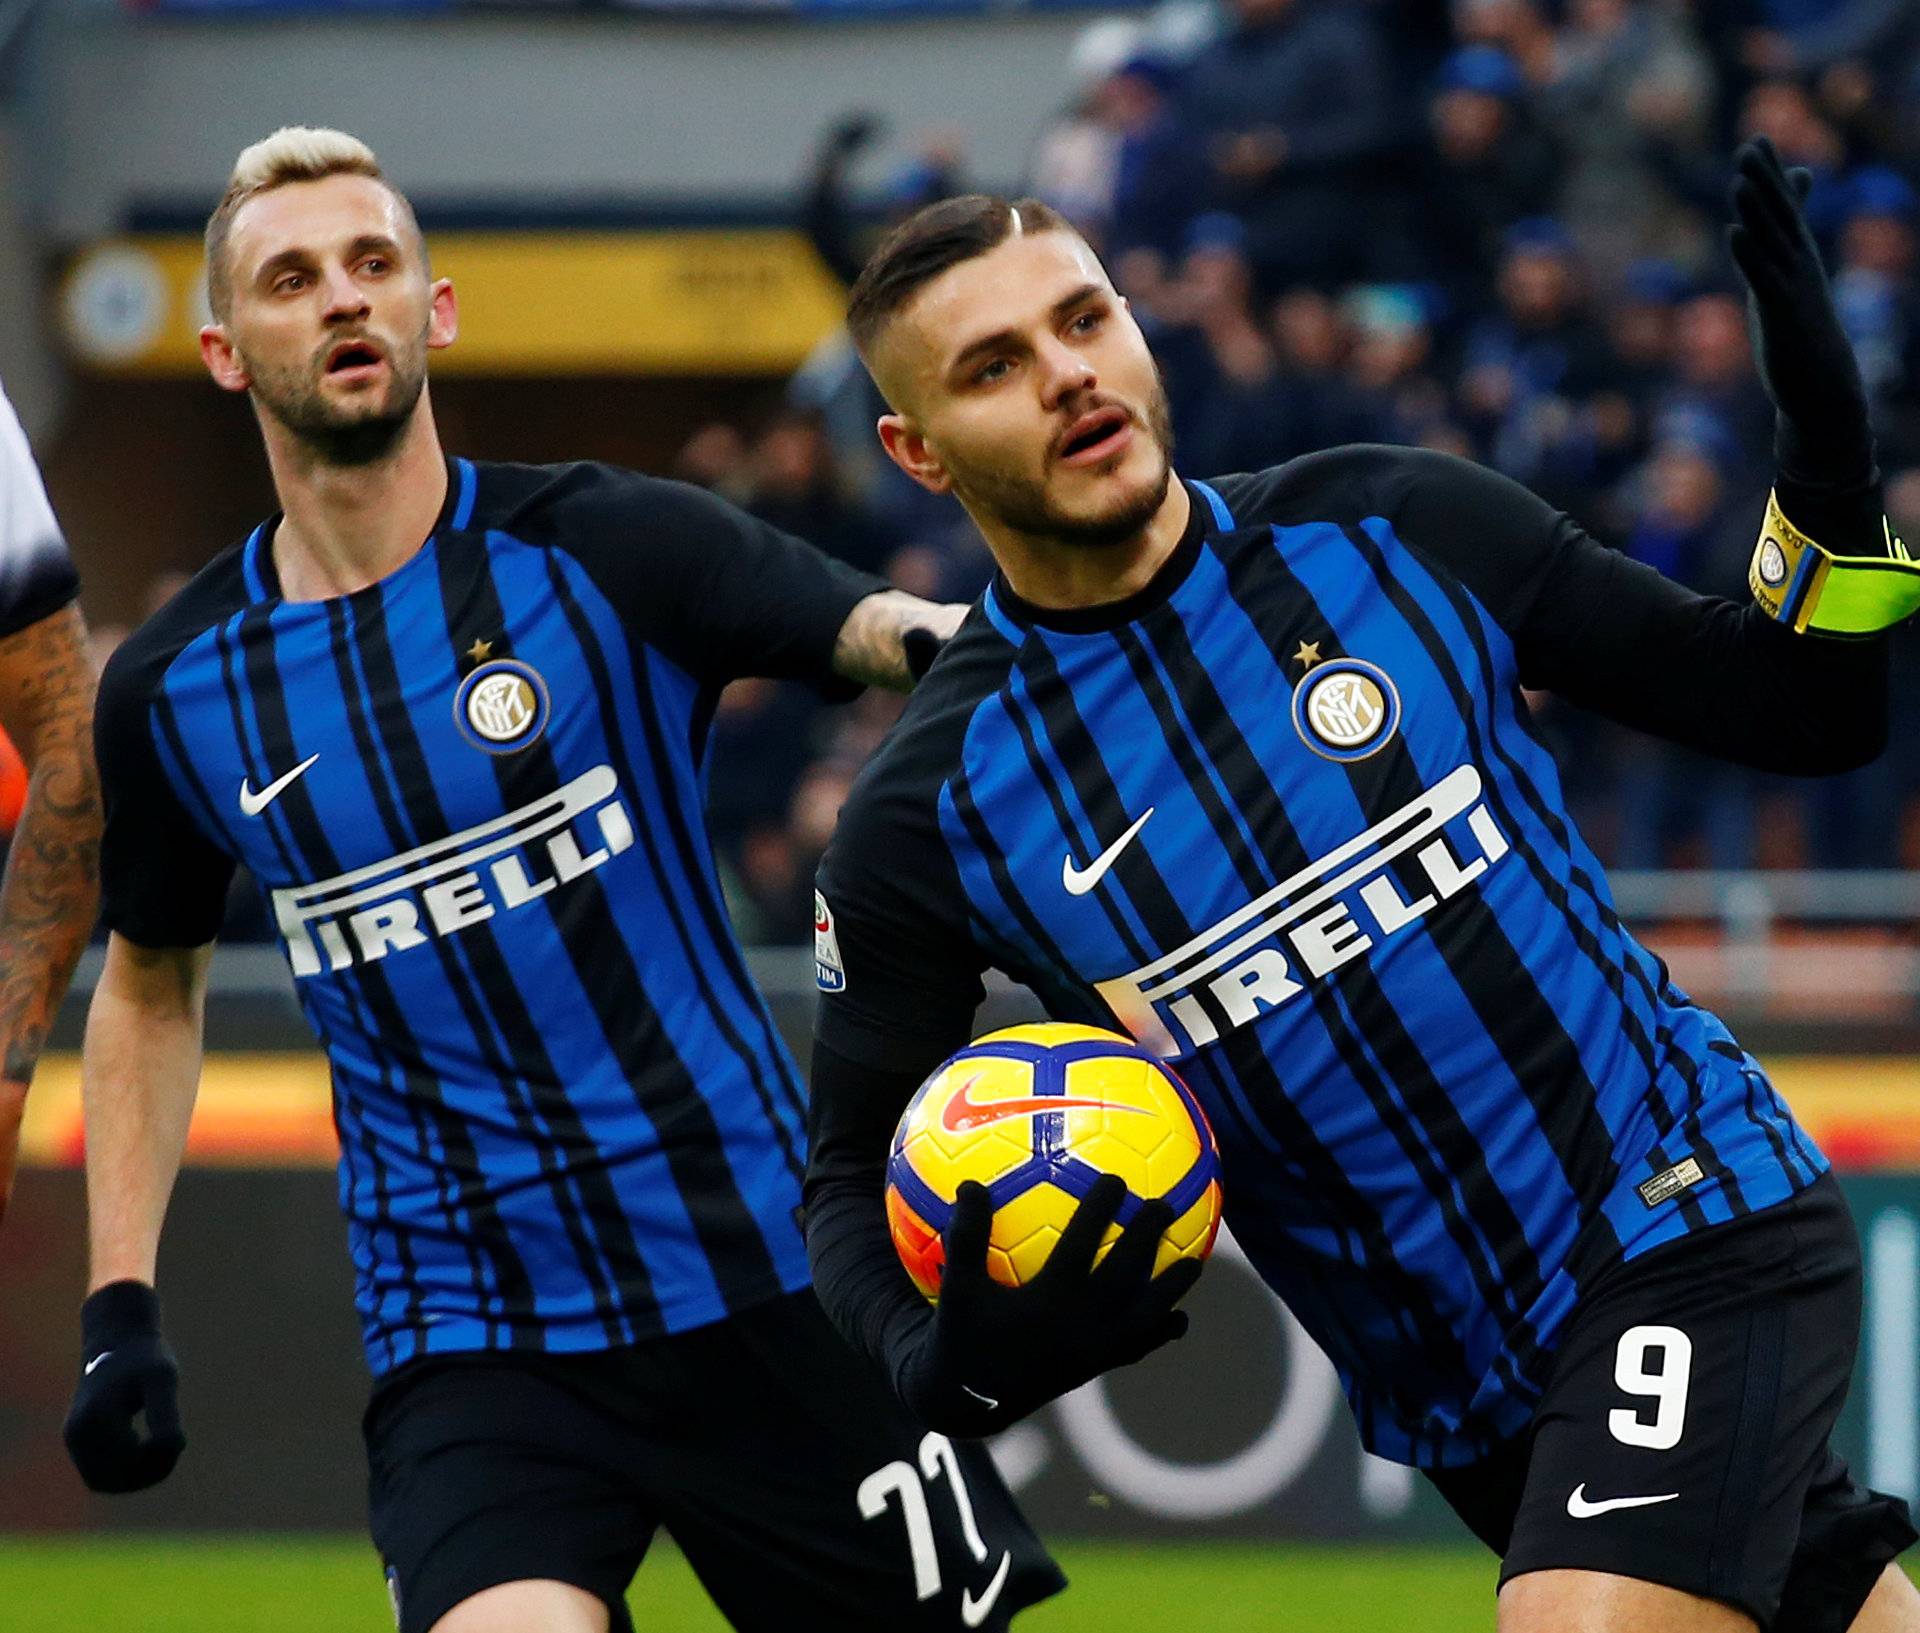 Serie A - Inter Milan vs Udinese